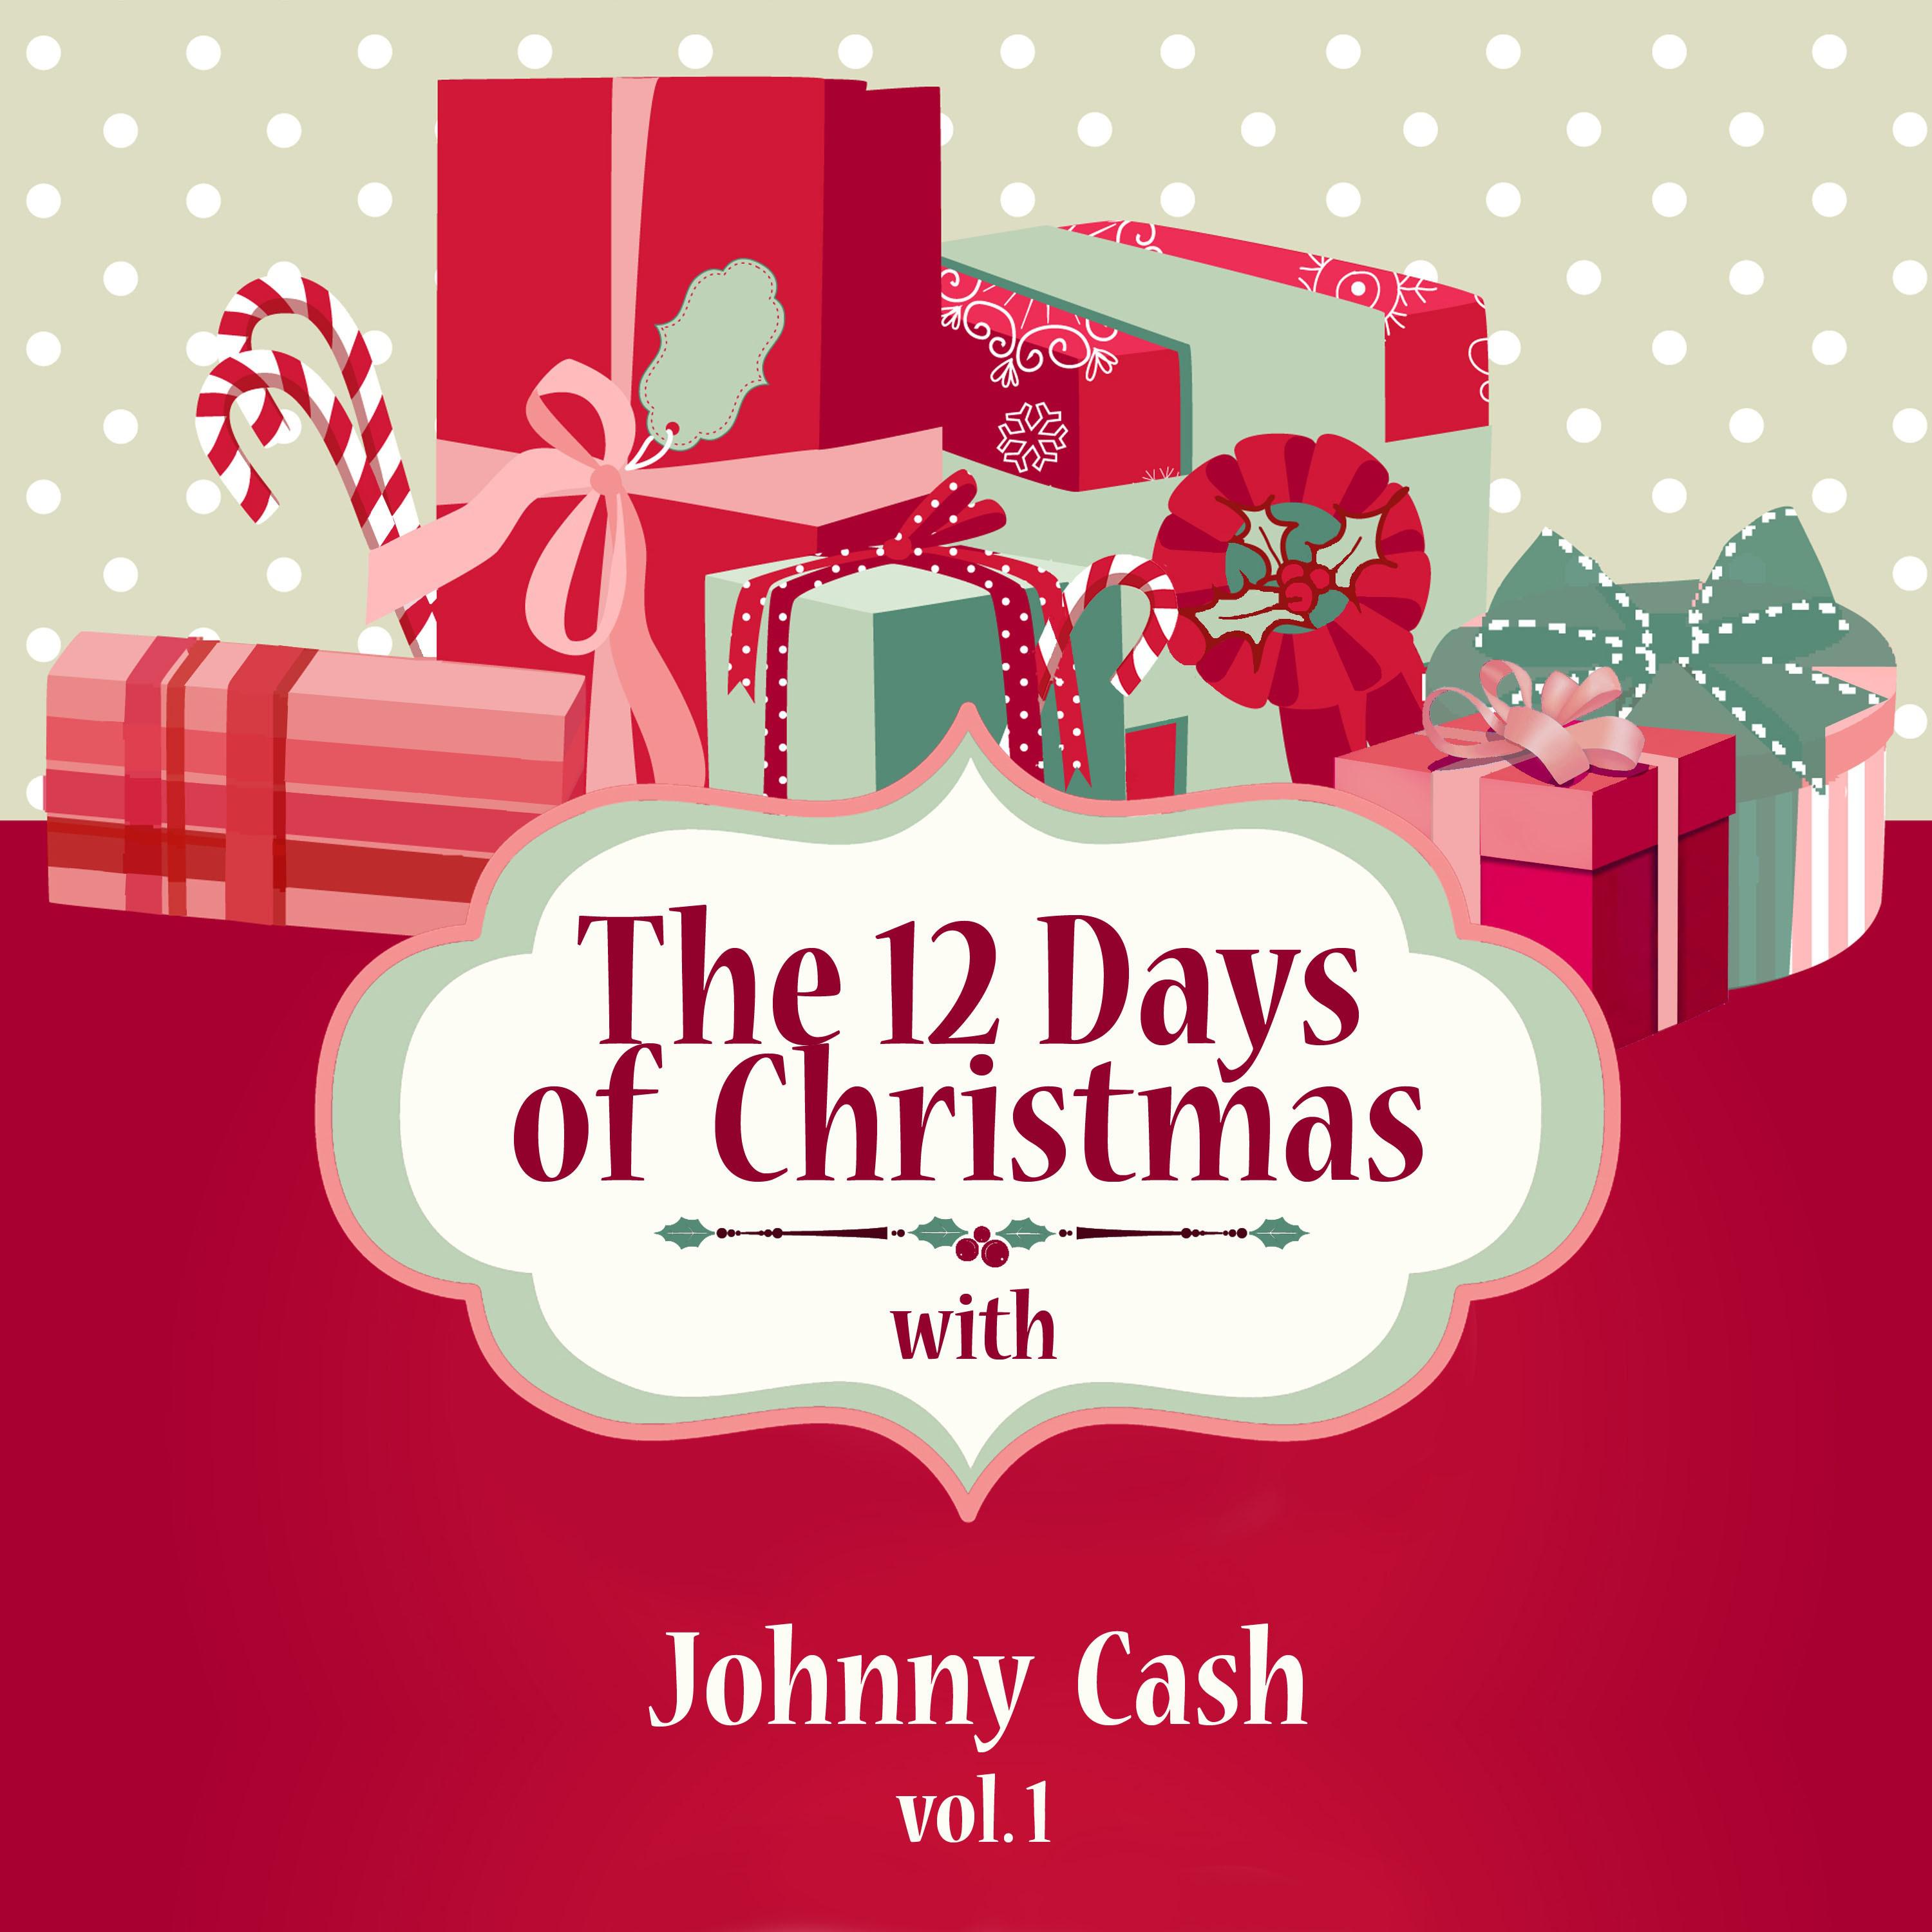 The 12 Days of Christmas with Johnny Cash, Vol. 1